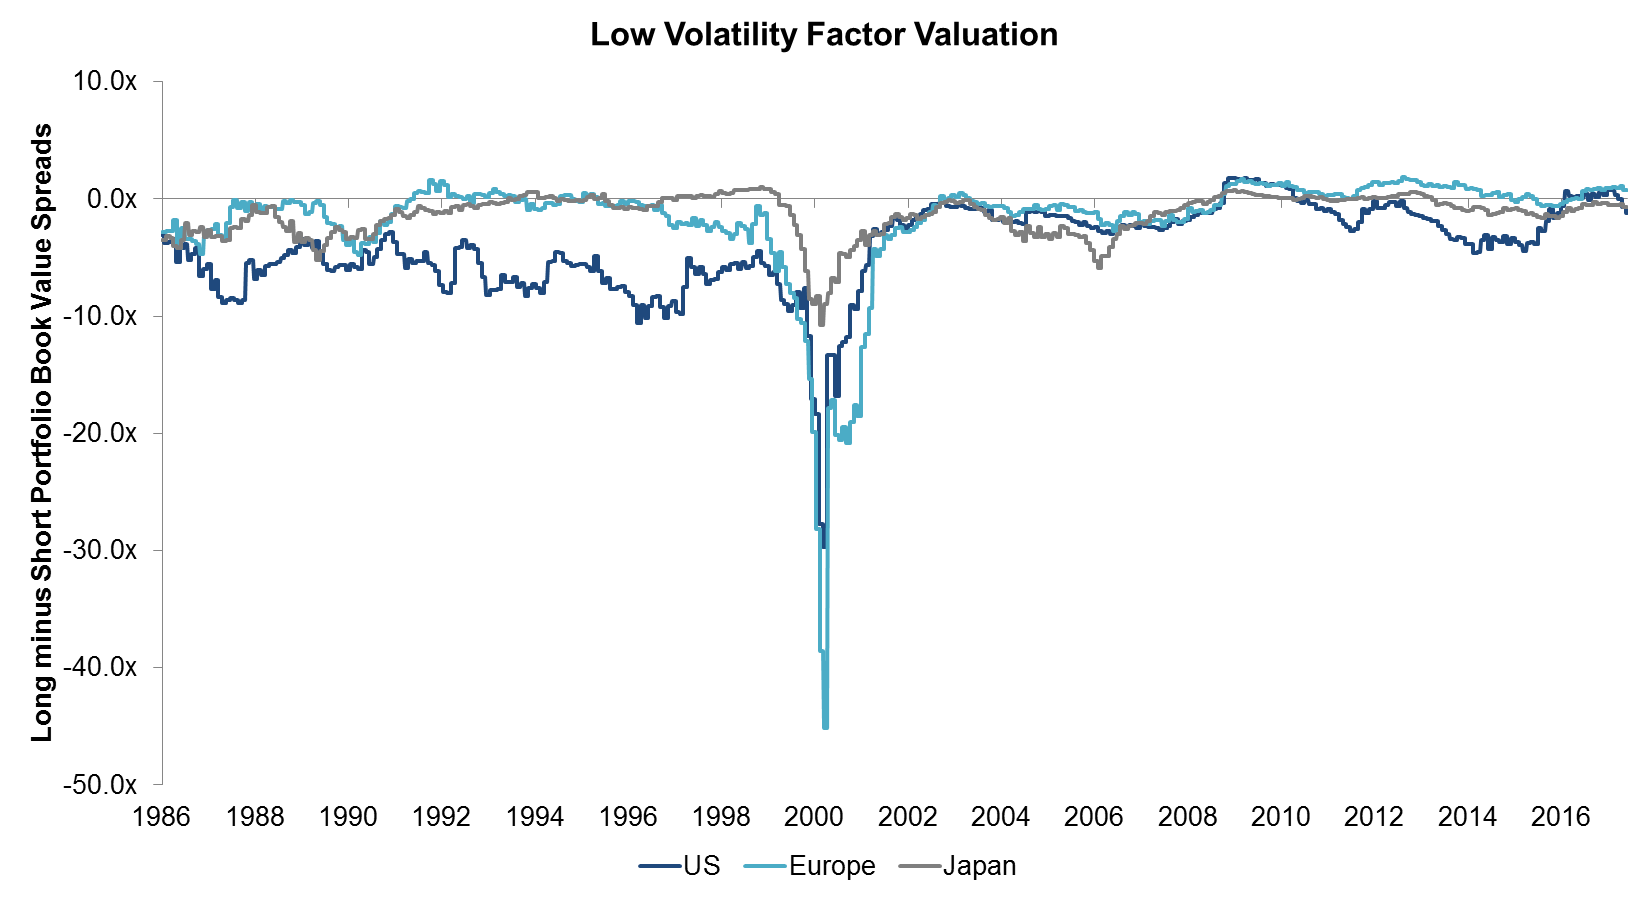 Low Volatility Factor Valuation